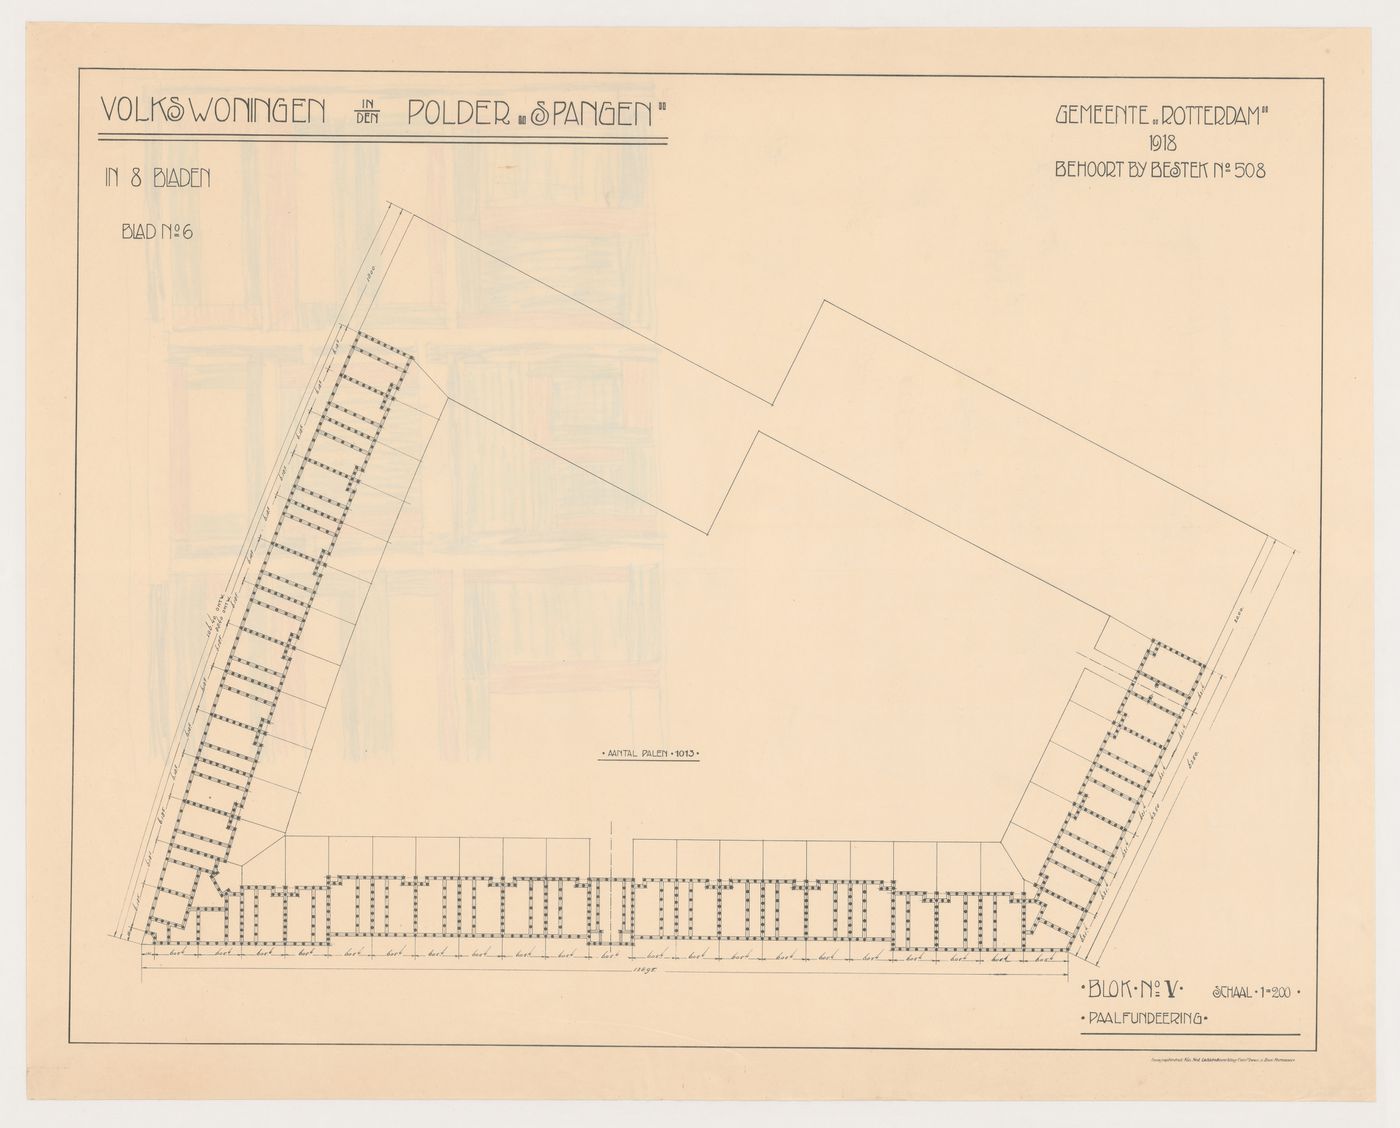 Piling plan for Block 5, Spangen Housing Estate, Rotterdam, Netherlands; verso: Elevation [?] for Block 5, probably showing the exterior colour scheme, Spangen Housing Estate, Rotterdam, Netherlands